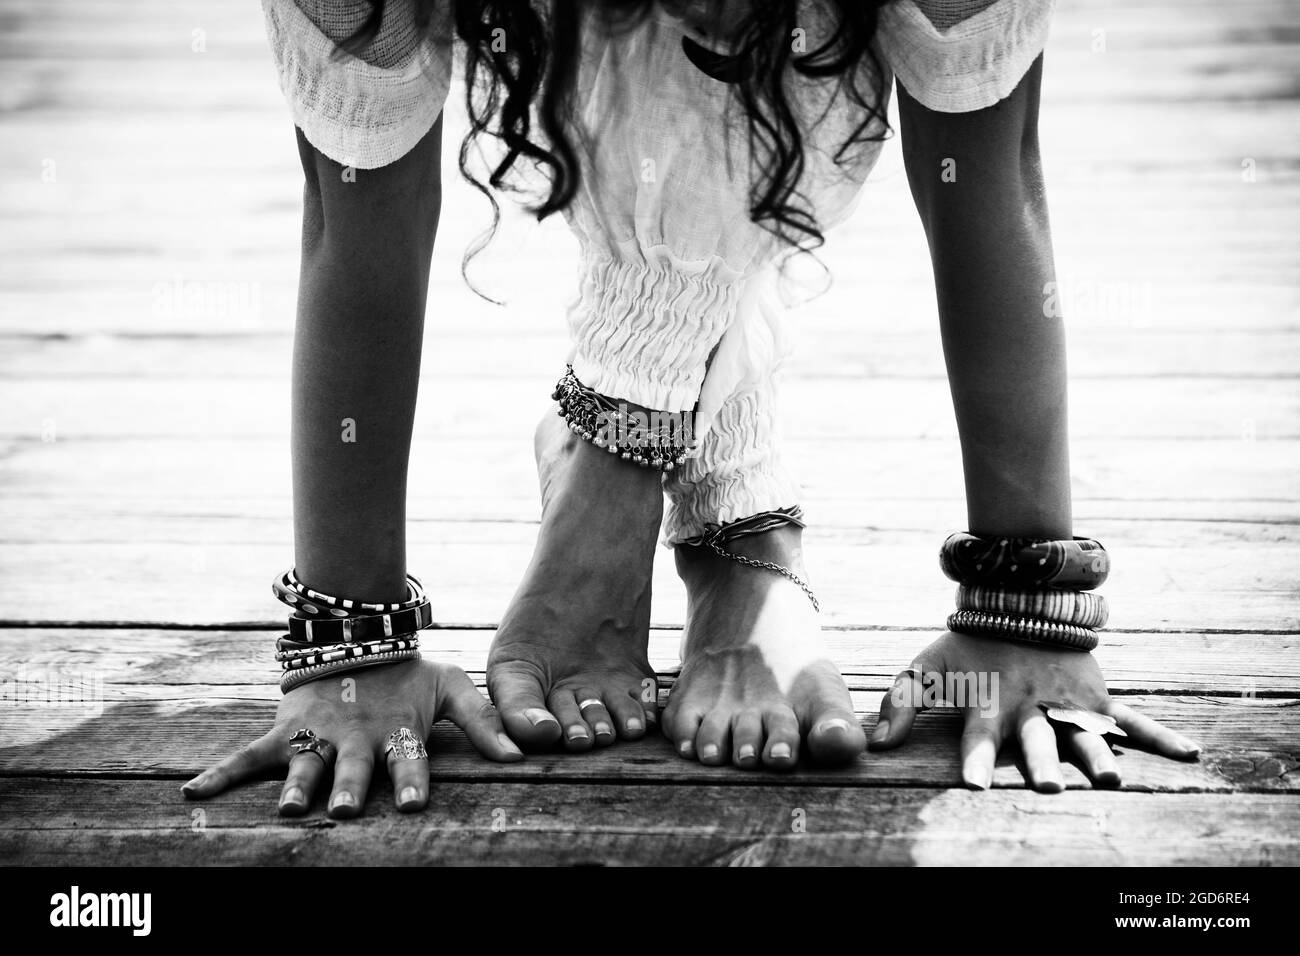 Barefoot young woman Black and White Stock Photos & Images - Alamy